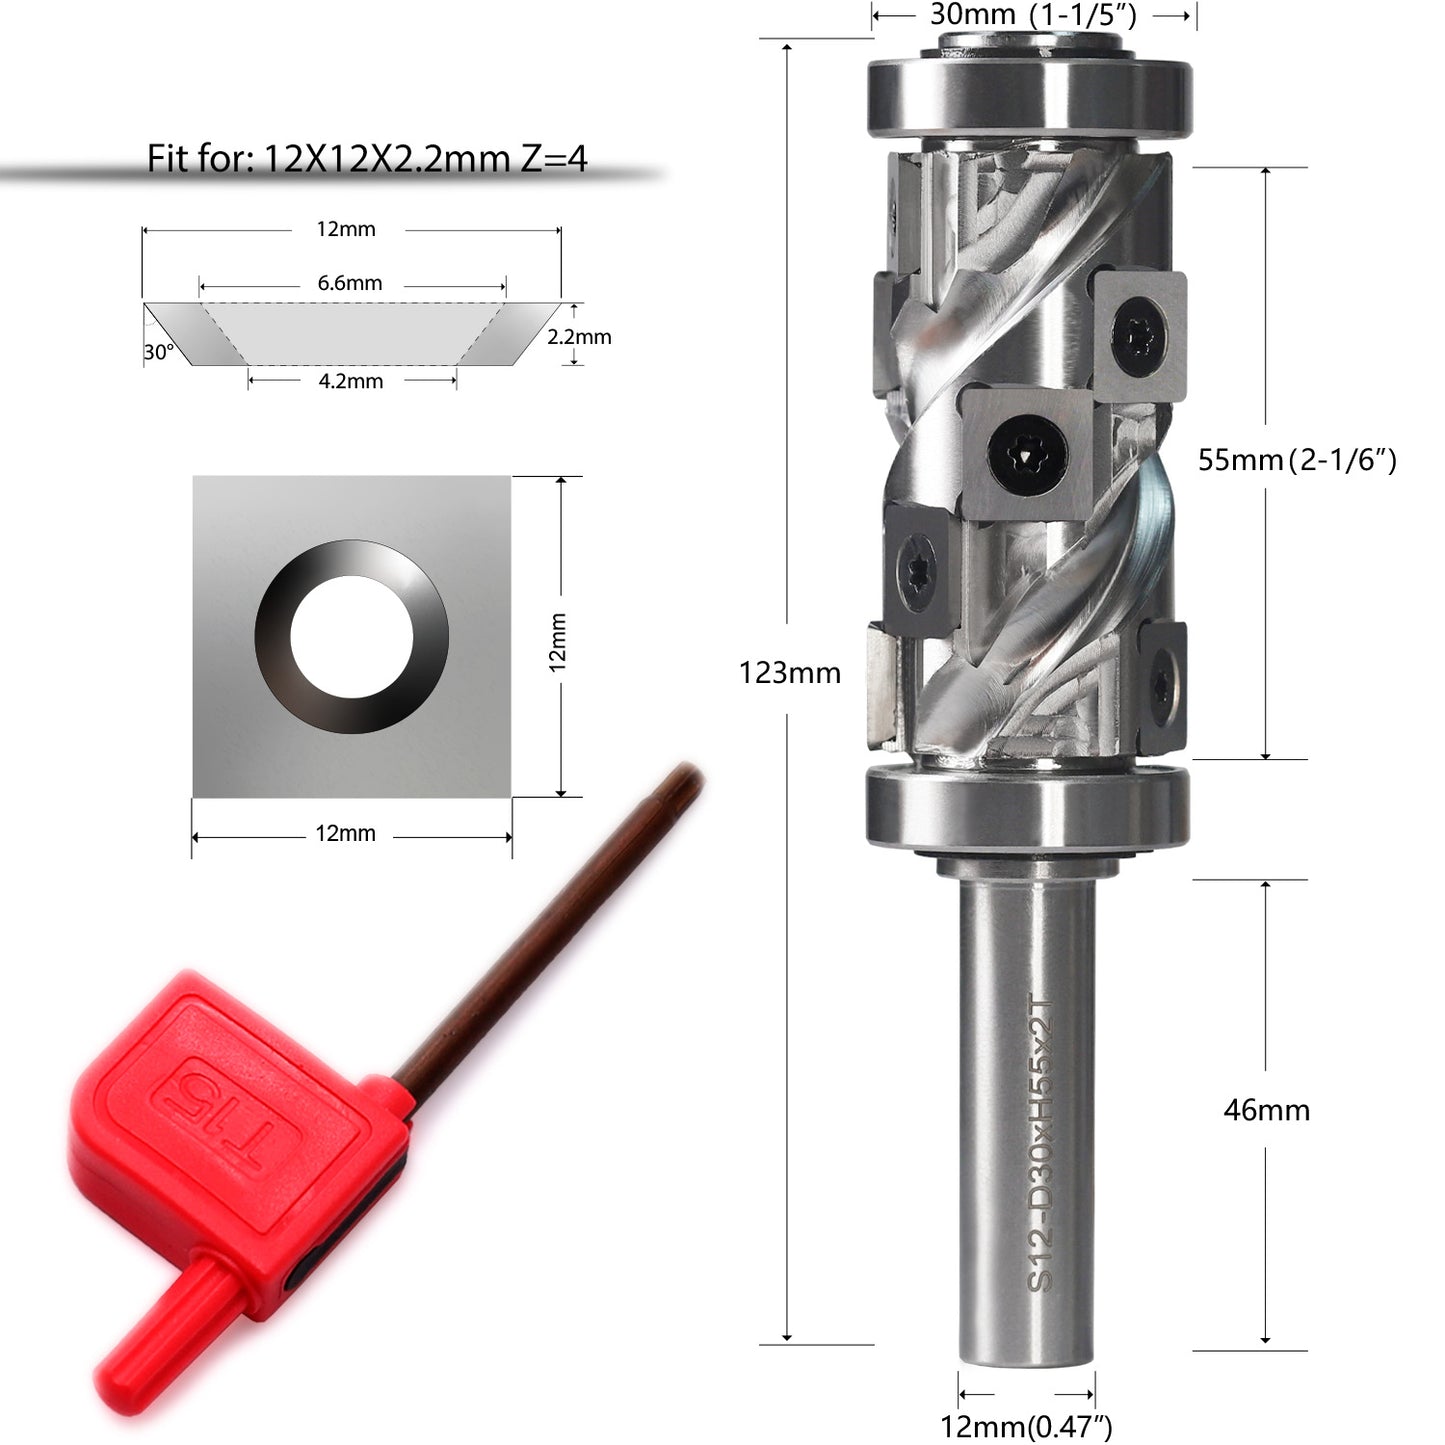 yeptooling double bearing flush trim router bit milling cutter for woodworking trimming, 12 mm shank diameter,  30 mm cutting diameter,  55 mm cutting length, 123 mm overall length 